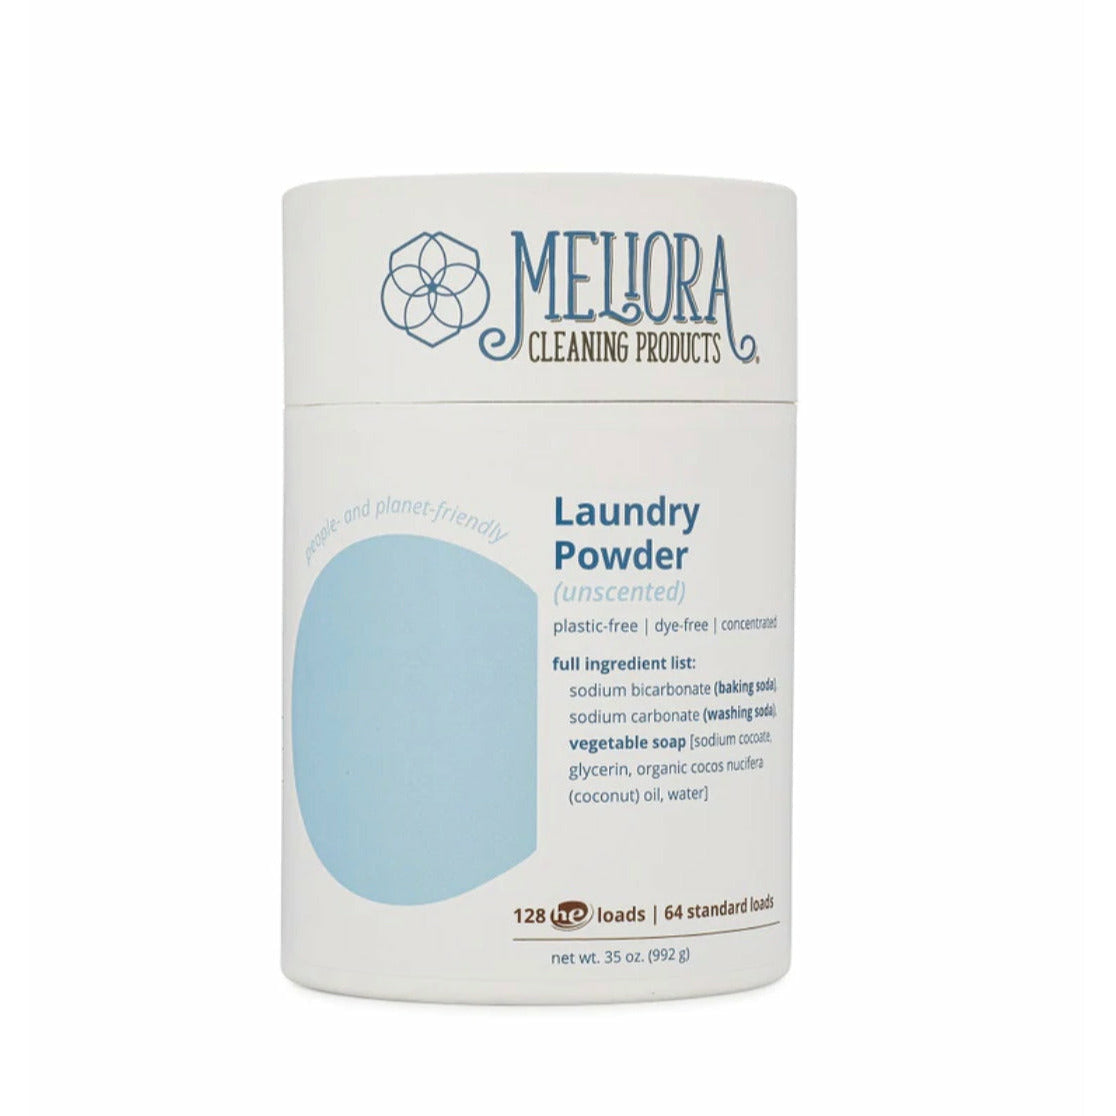 Meliora Laundry Detergent, Natural and Perfect for Babies & Children’s Sensitive Skin Personal Care - Alder & Alouette